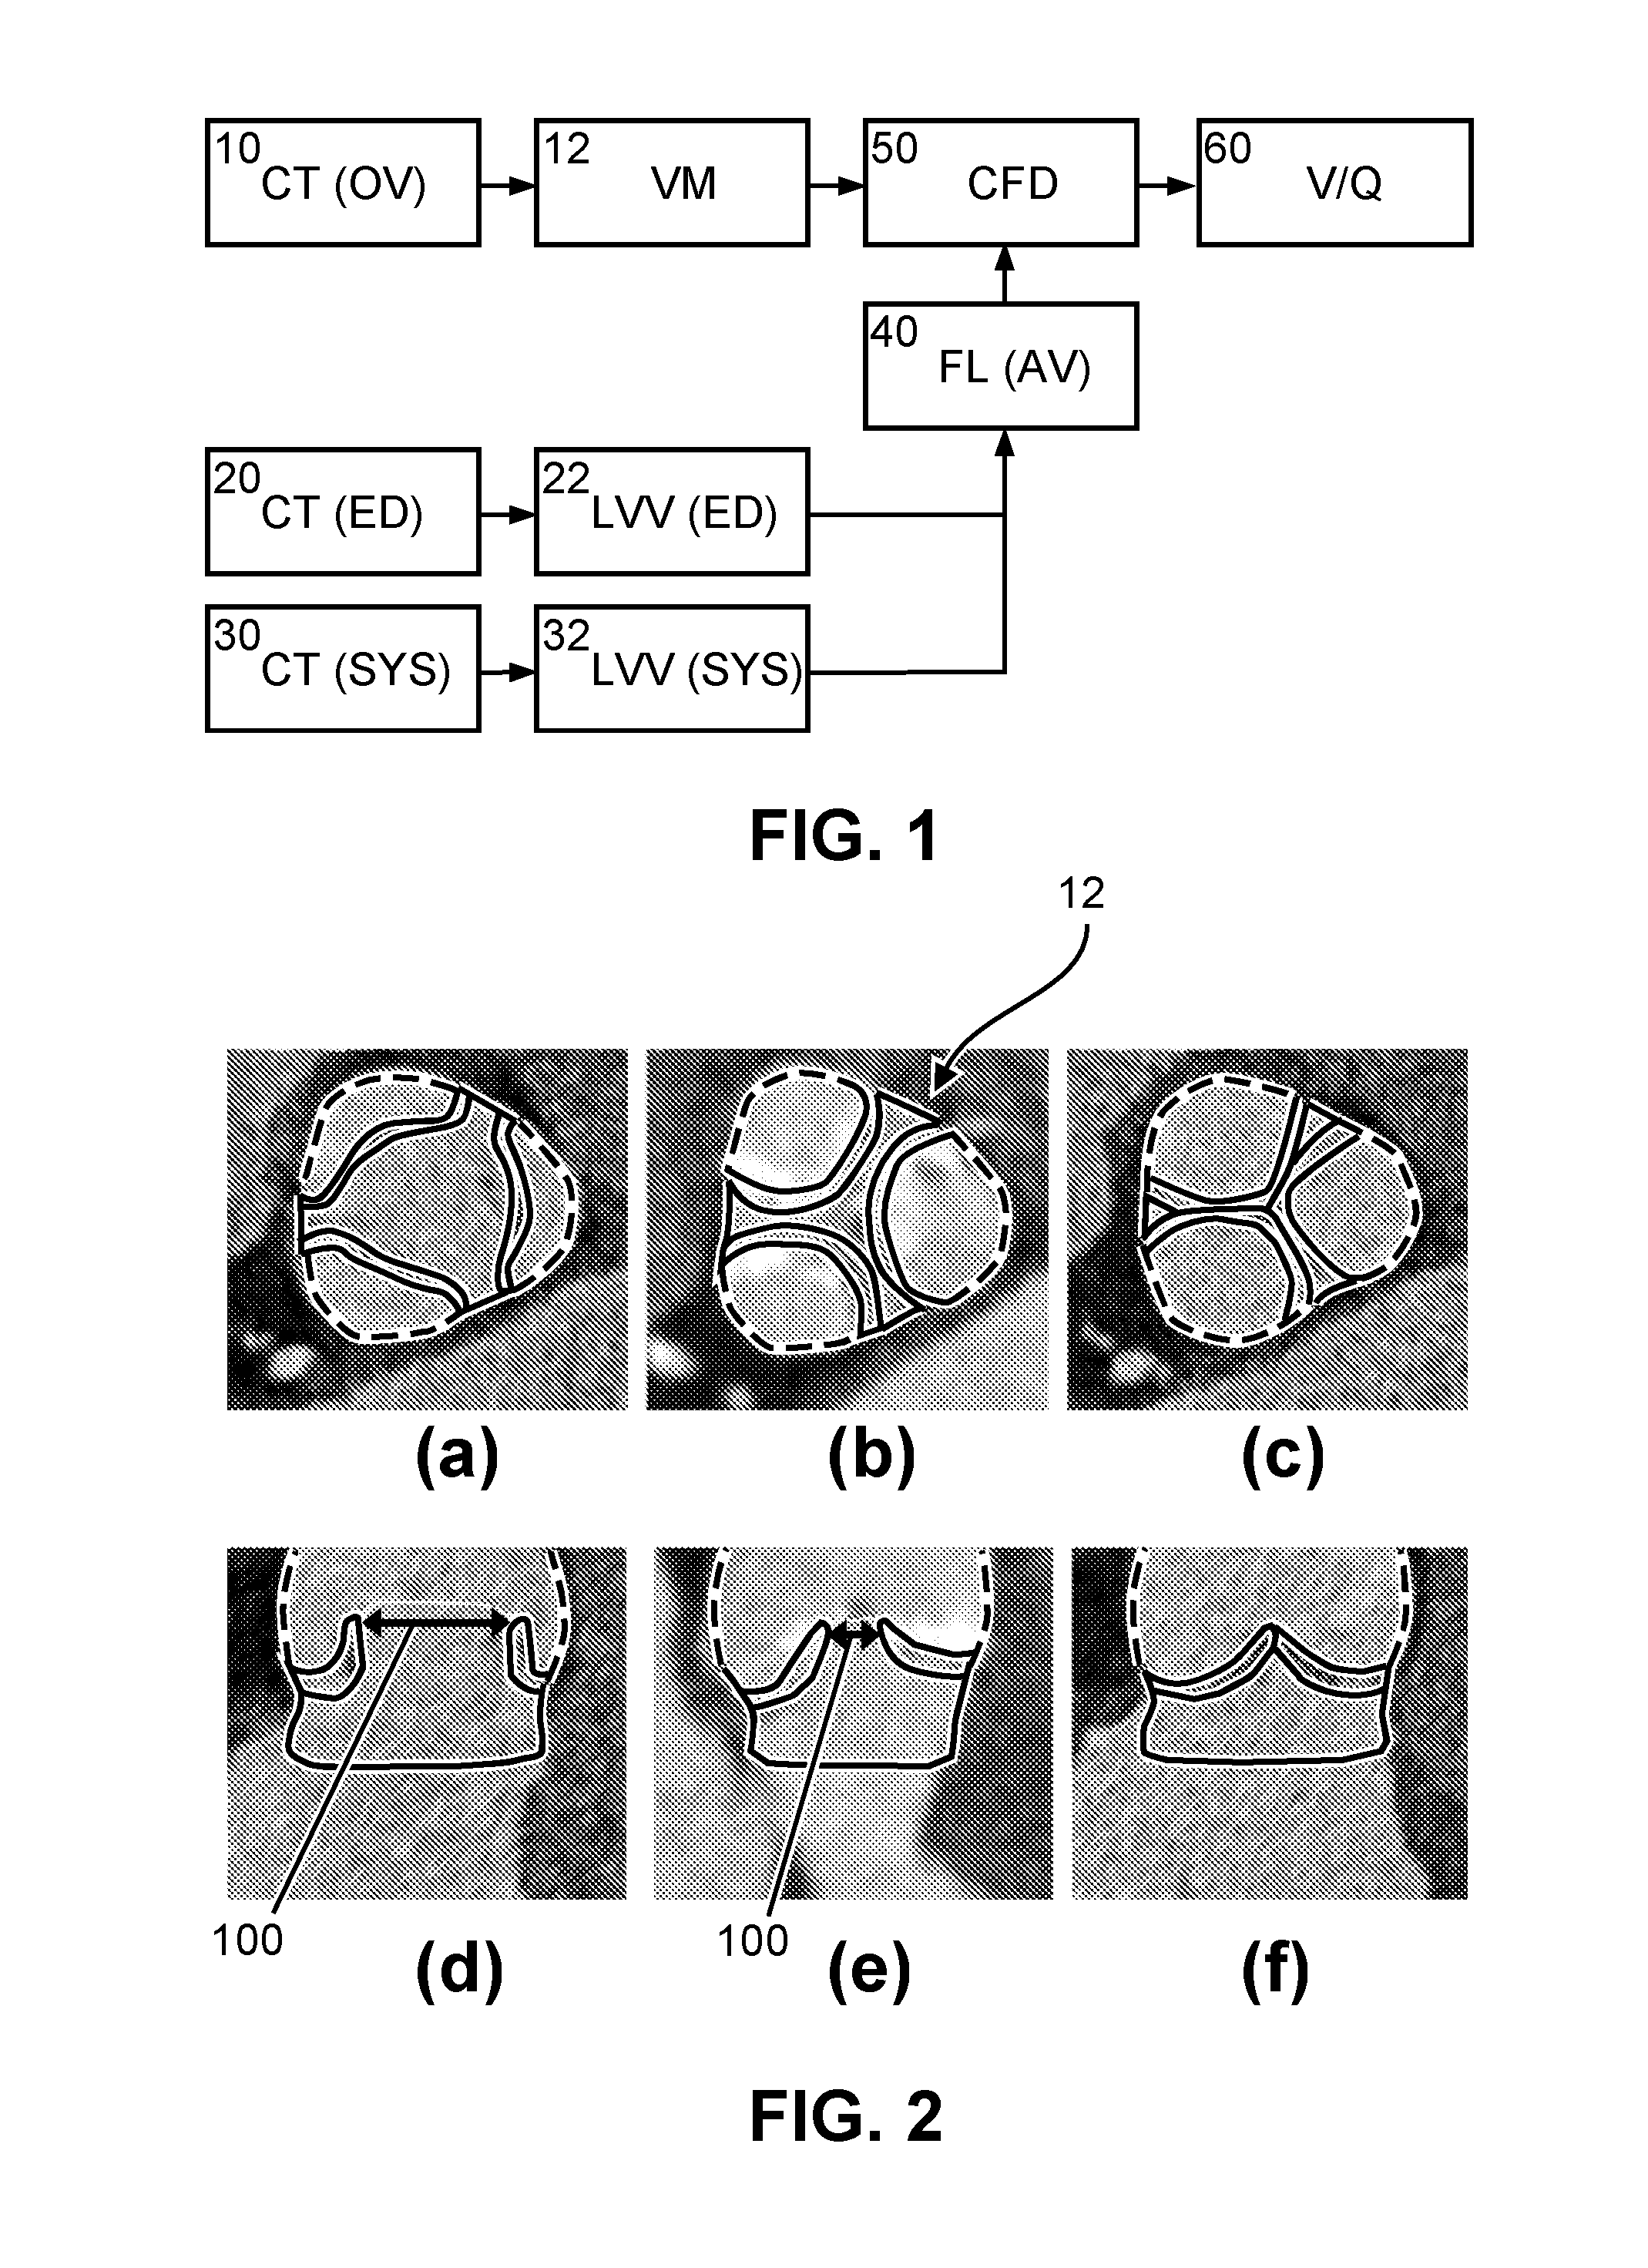 Method and apparatus for simulating blood flow under patient-specific boundary conditions derived from an estimated cardiac ejection output